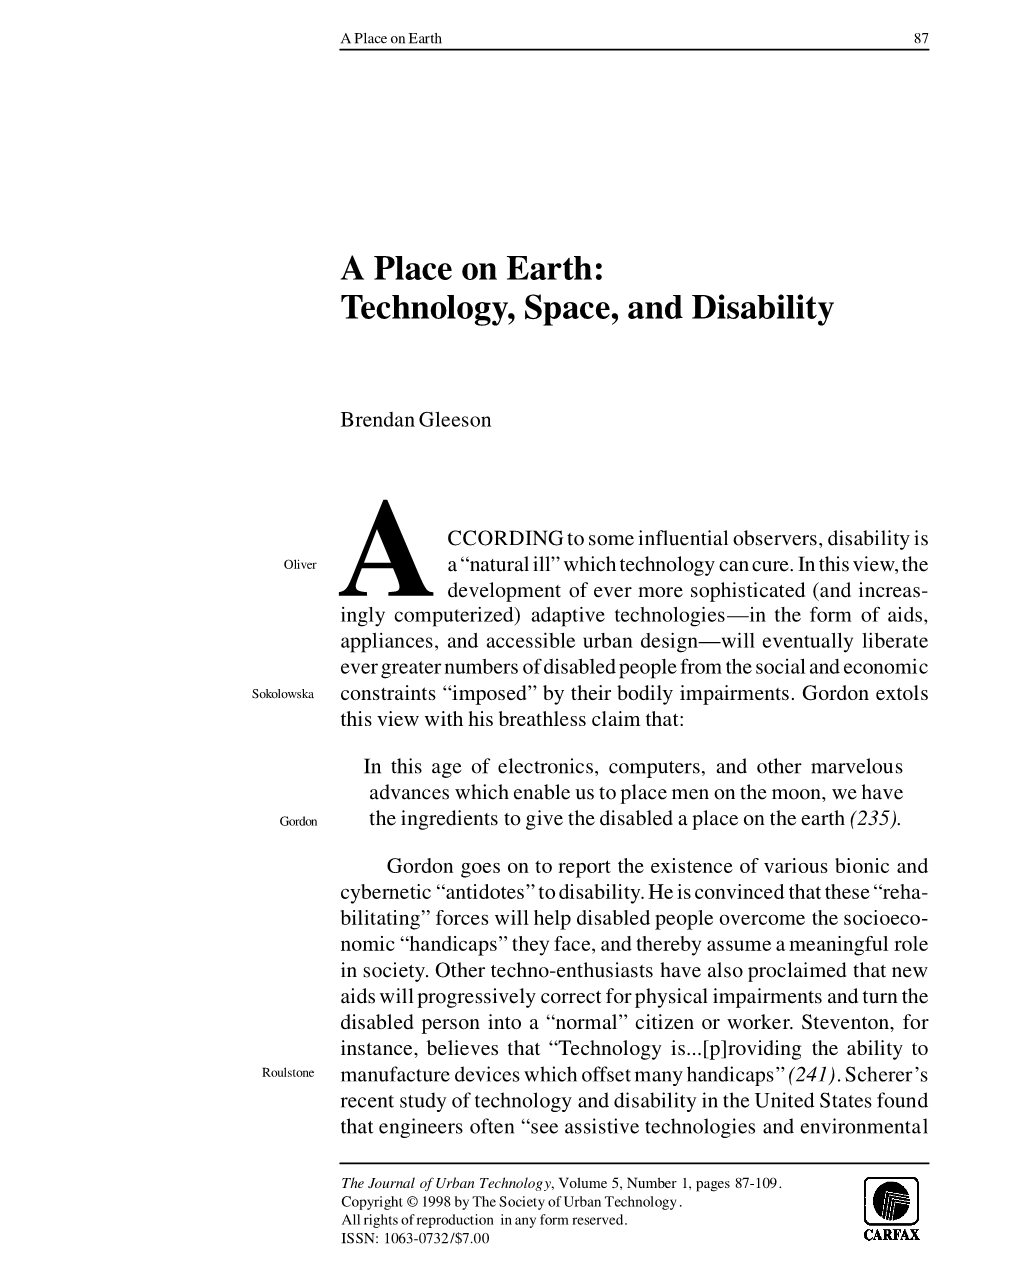 A Place on Earth: Technology, Space, and Disability